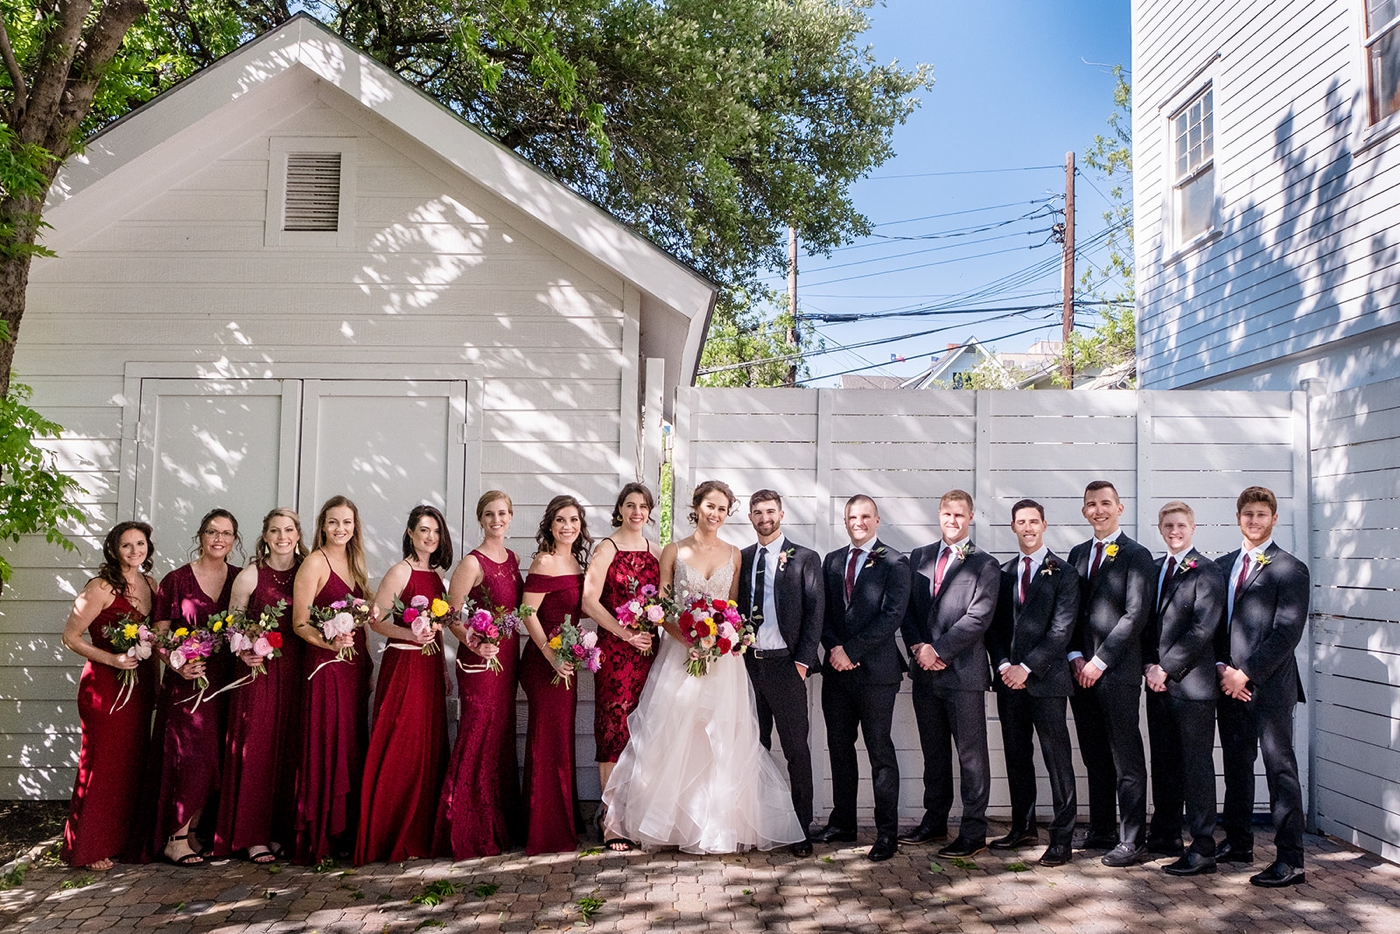 Burgundy bridesmaids dresses with colorful bouquets